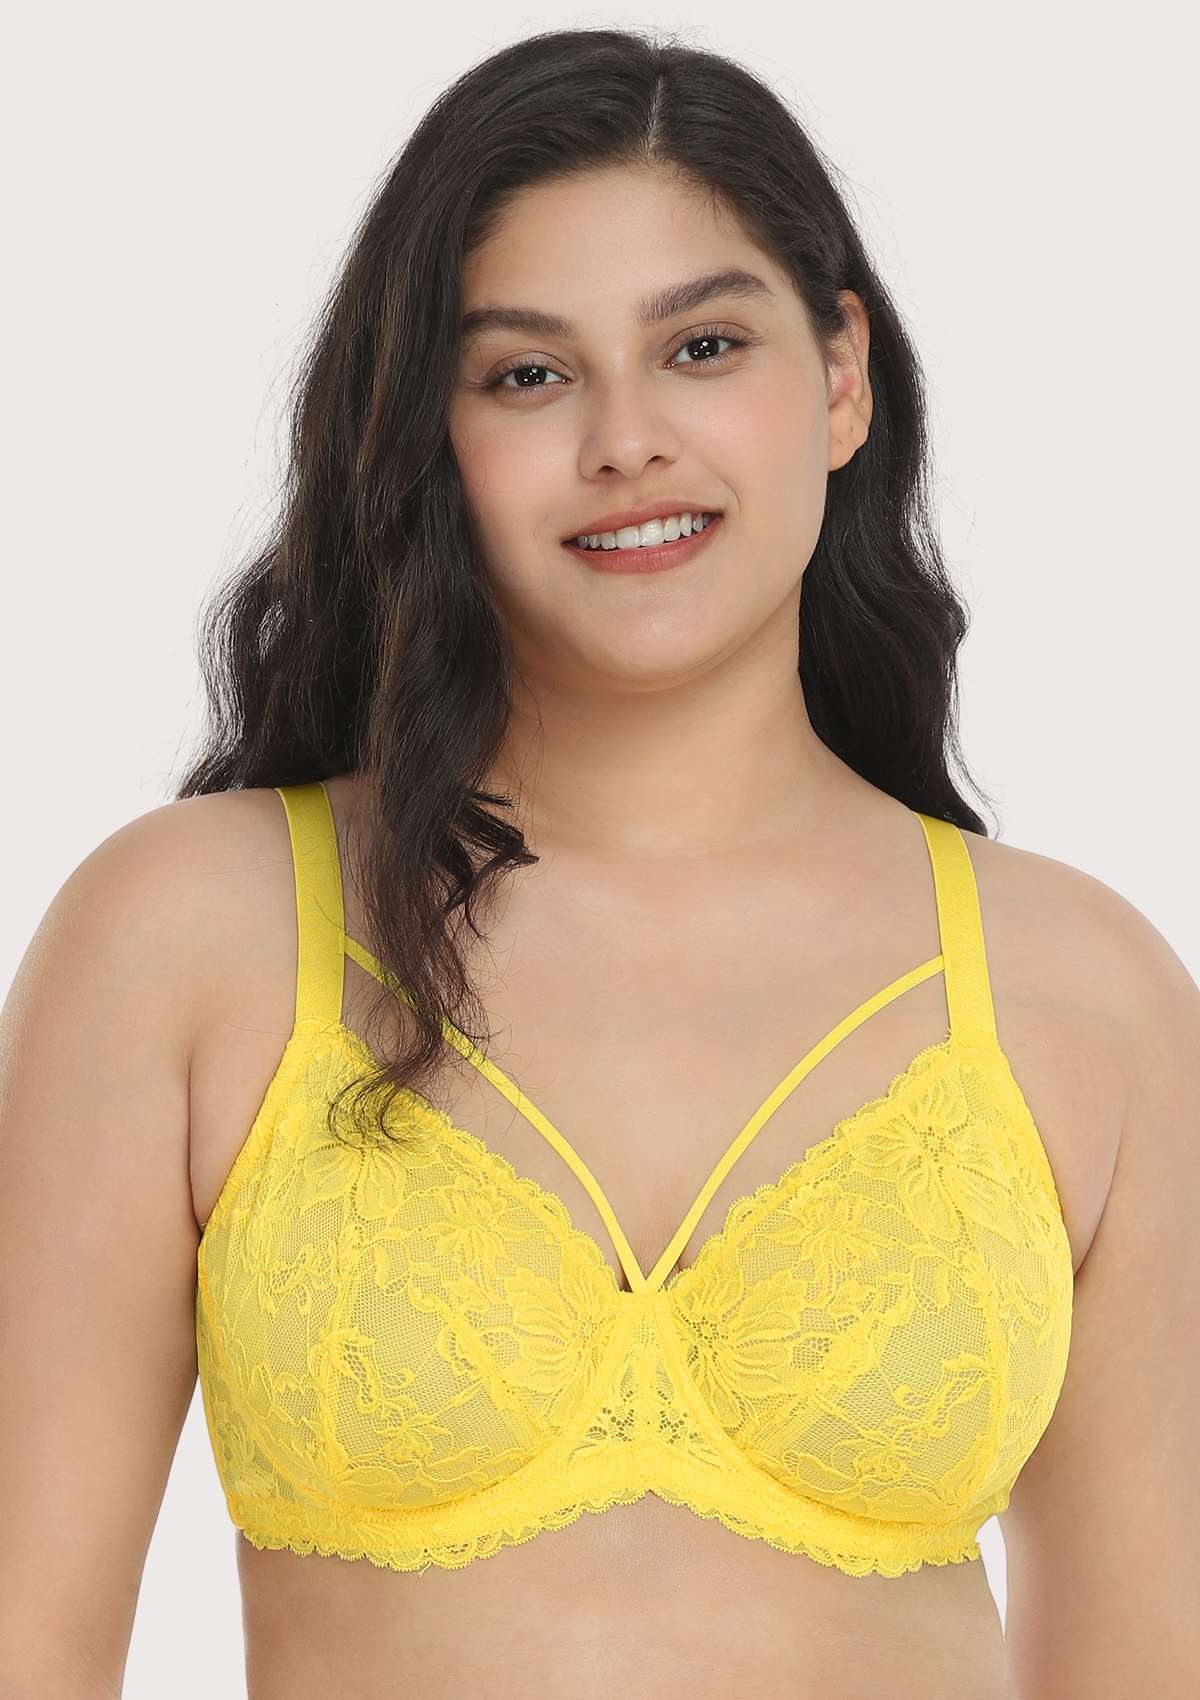 HSIA Unlined Lace Mesh Minimizer Bra For Large Breasts, Full Coverage - Bright Yellow / 38 / DDD/F